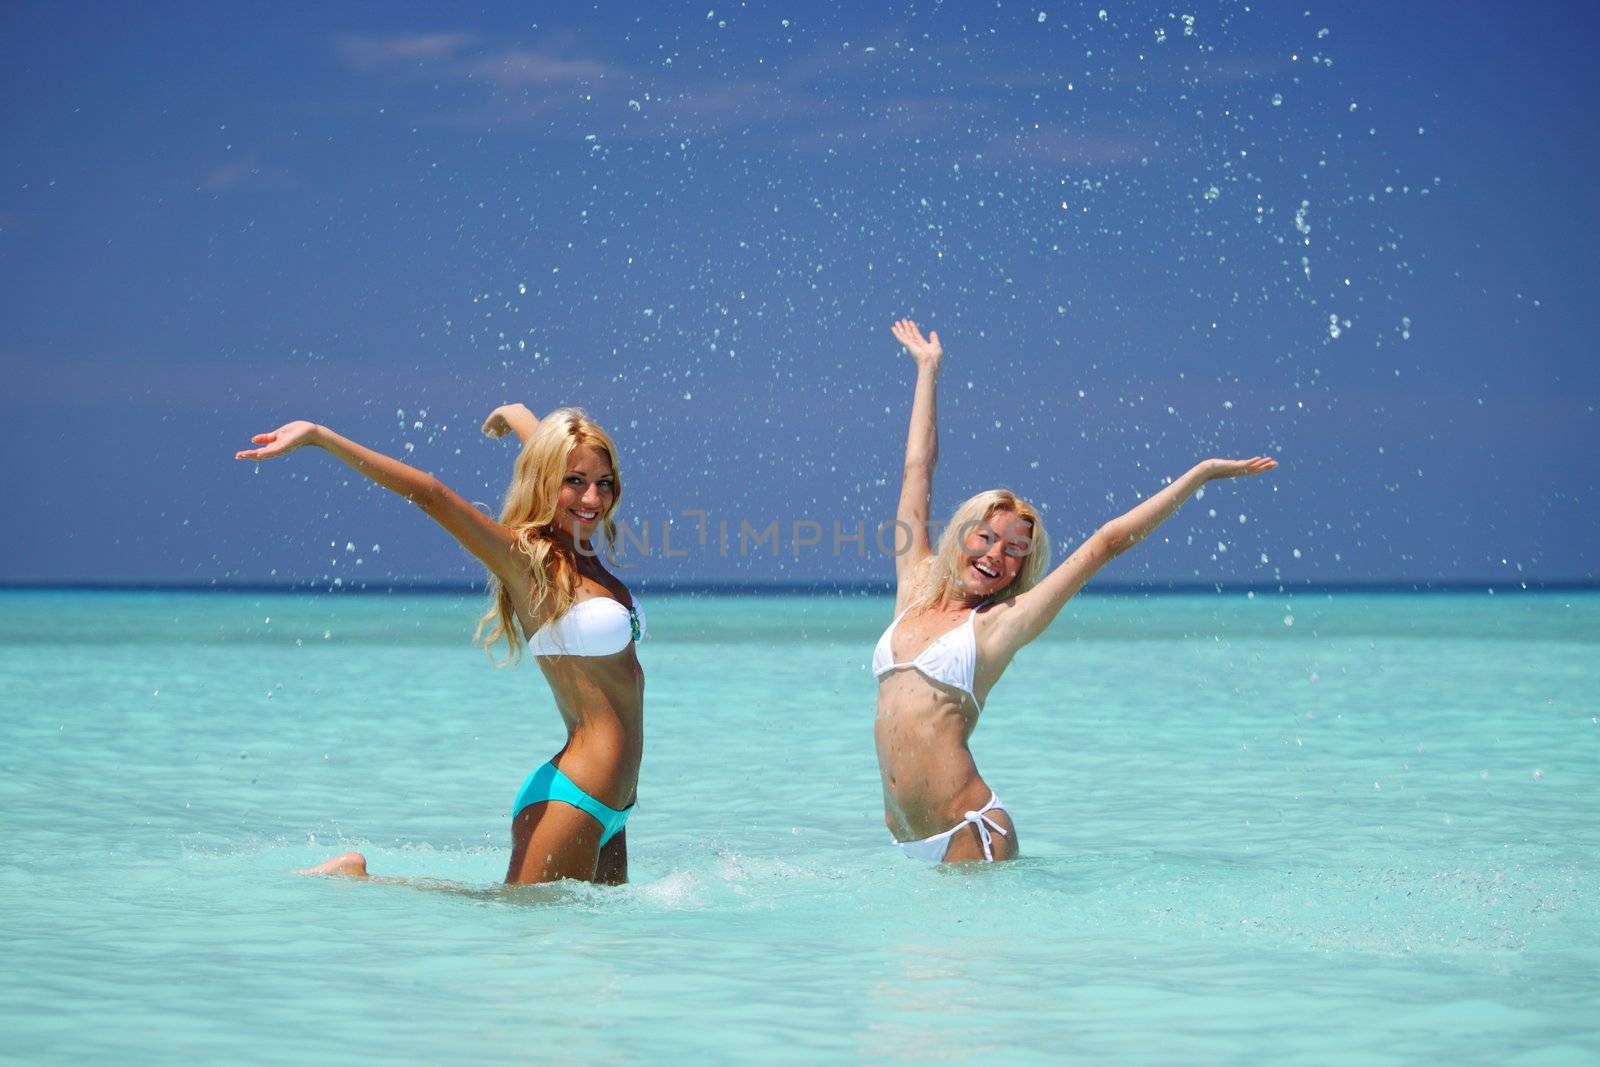 Two girls playing in ocean water